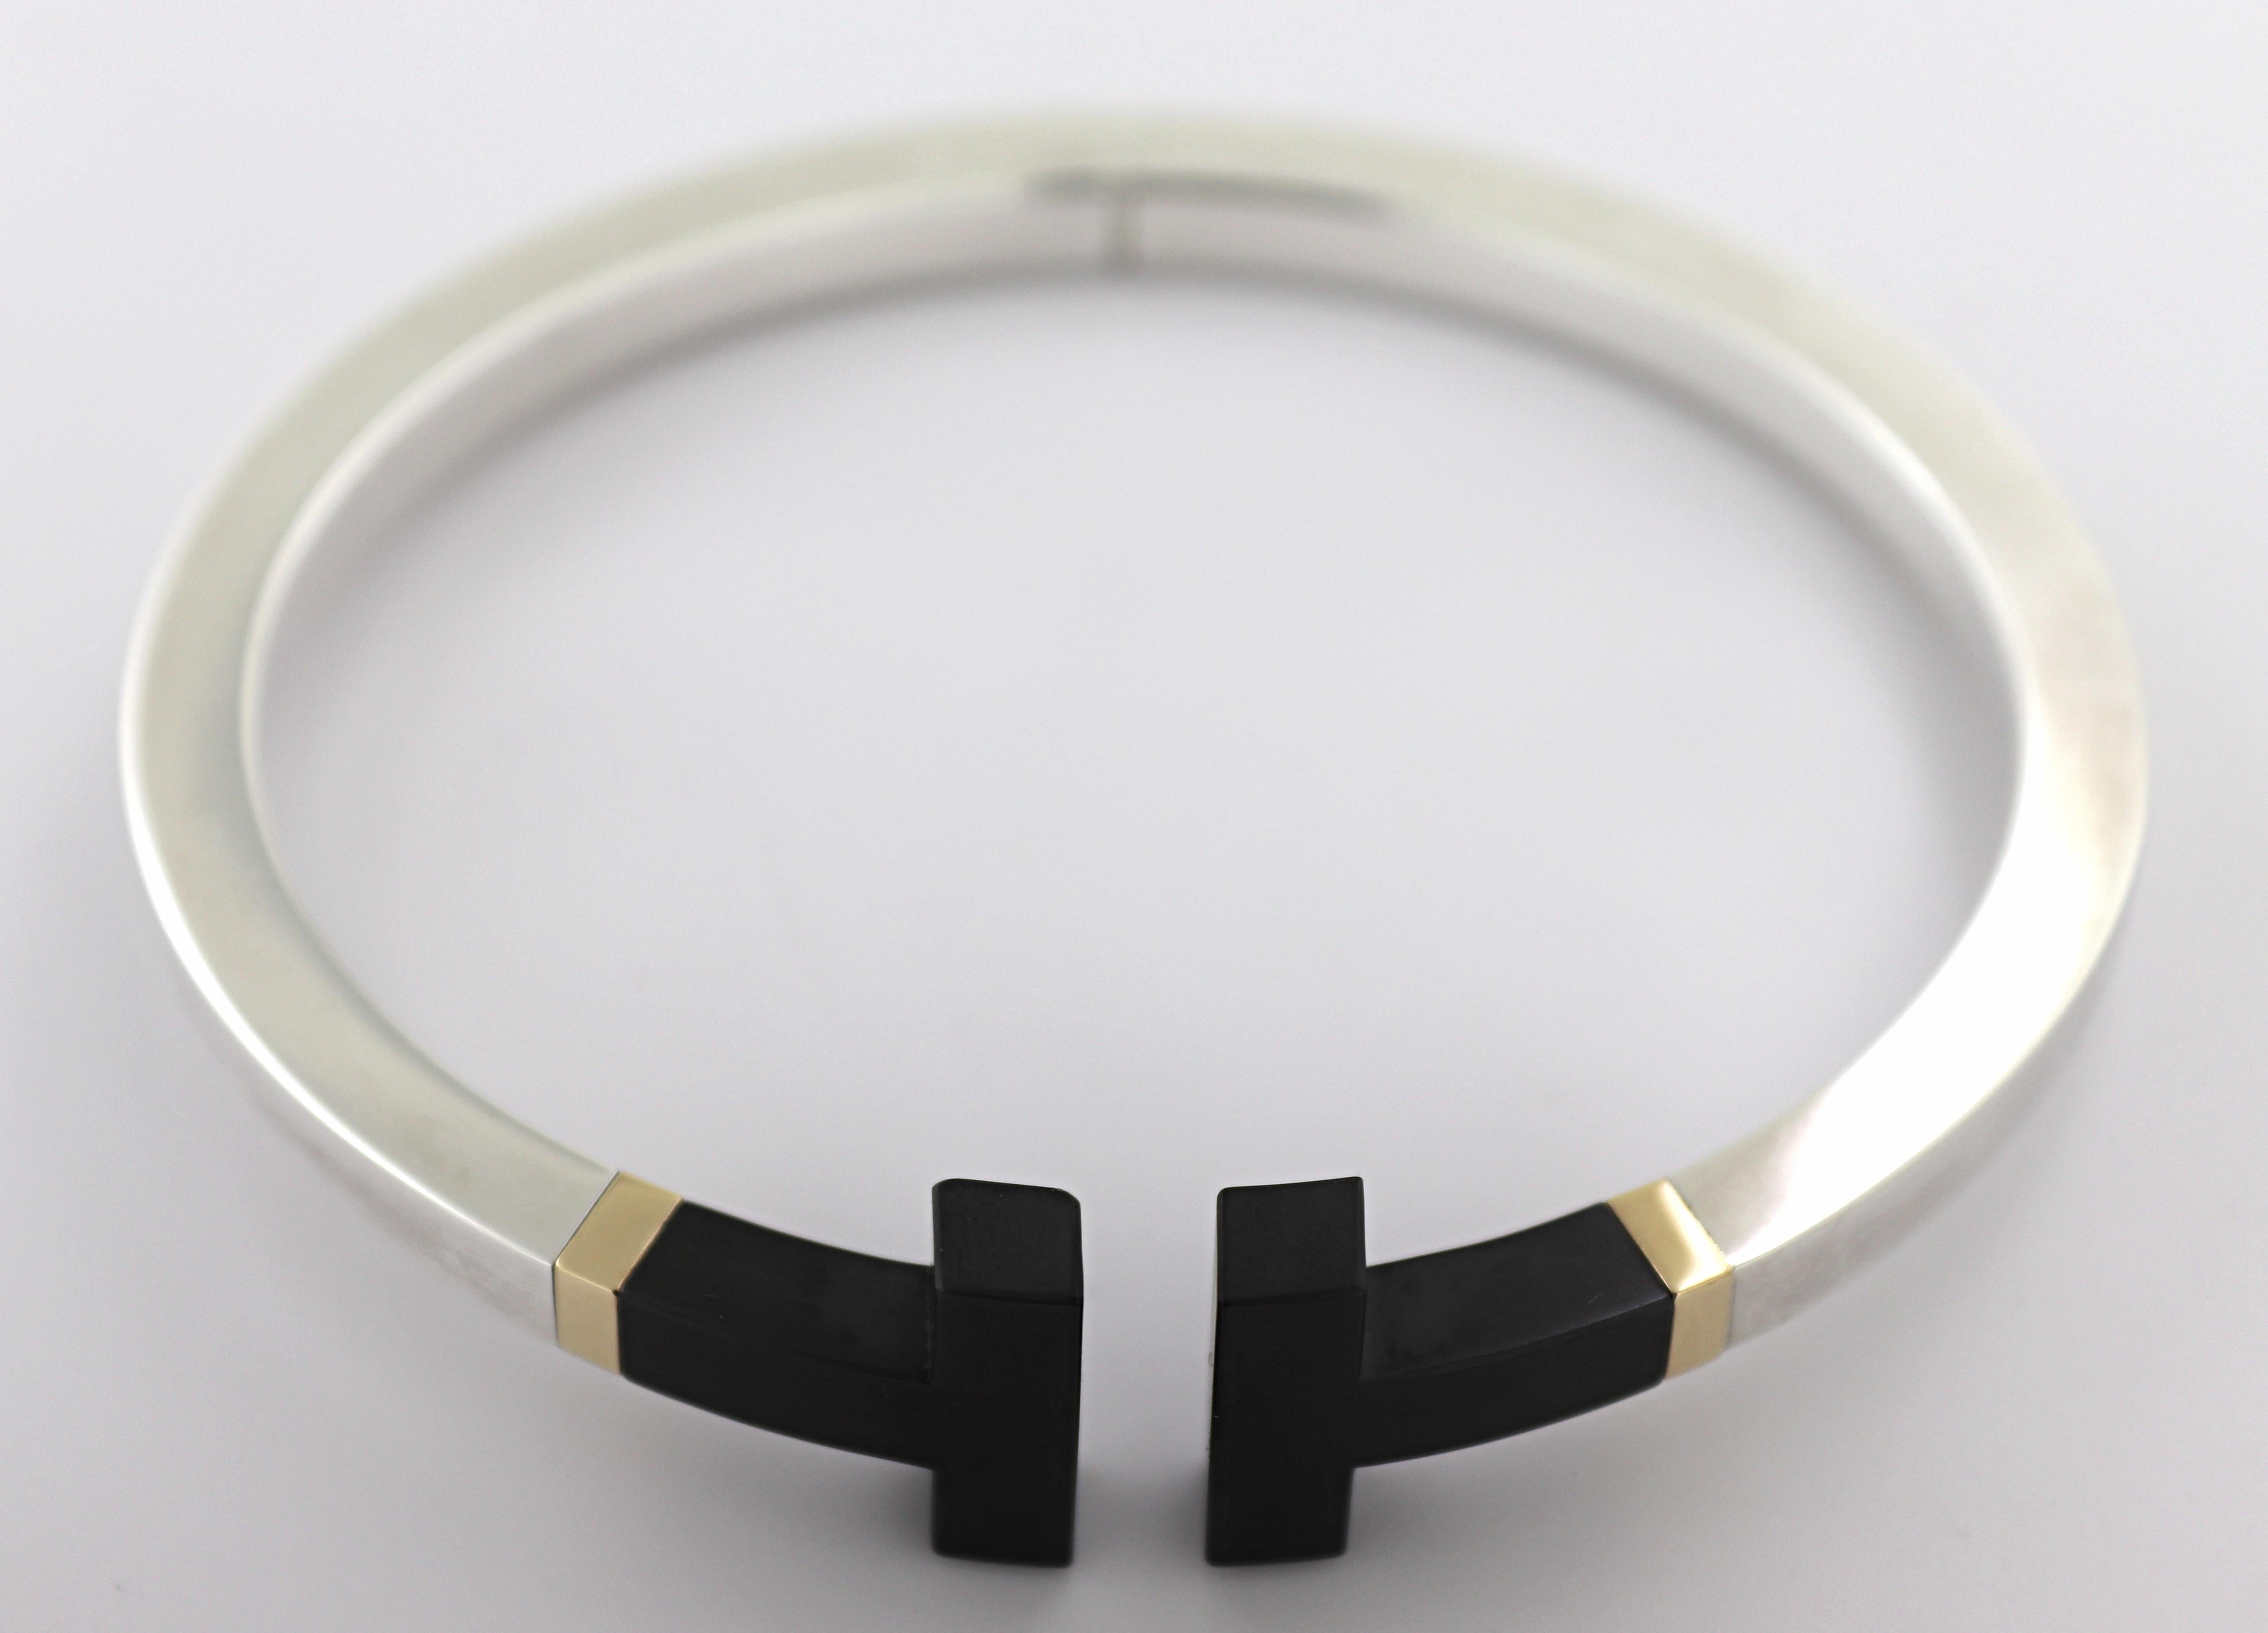 Tiffany & Co. Ceramic, Sterling Silver, 18k Yellow Gold “T” Bracelet For Sale 2